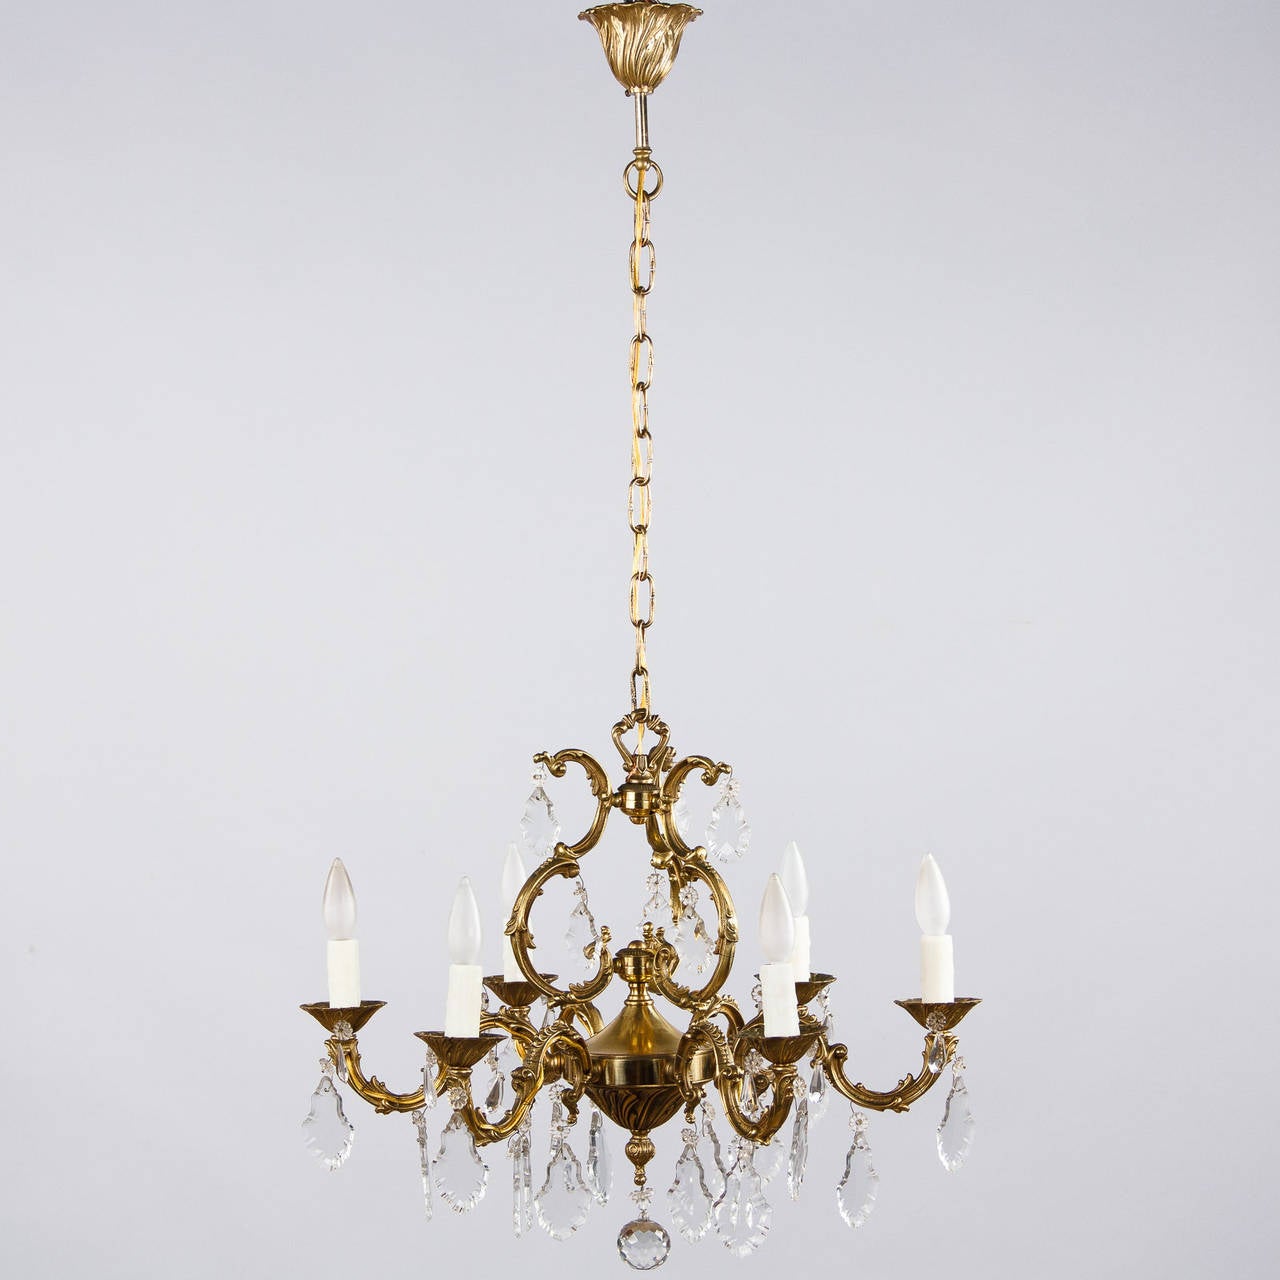 A 6 arm Louis XV Style Chandelier made of sculpted gilded bronze with scrolls and arabesques. Each arm features crystal pendants and the bottom center is finished with a crystal ball. The adjustable chain and canopy add 24